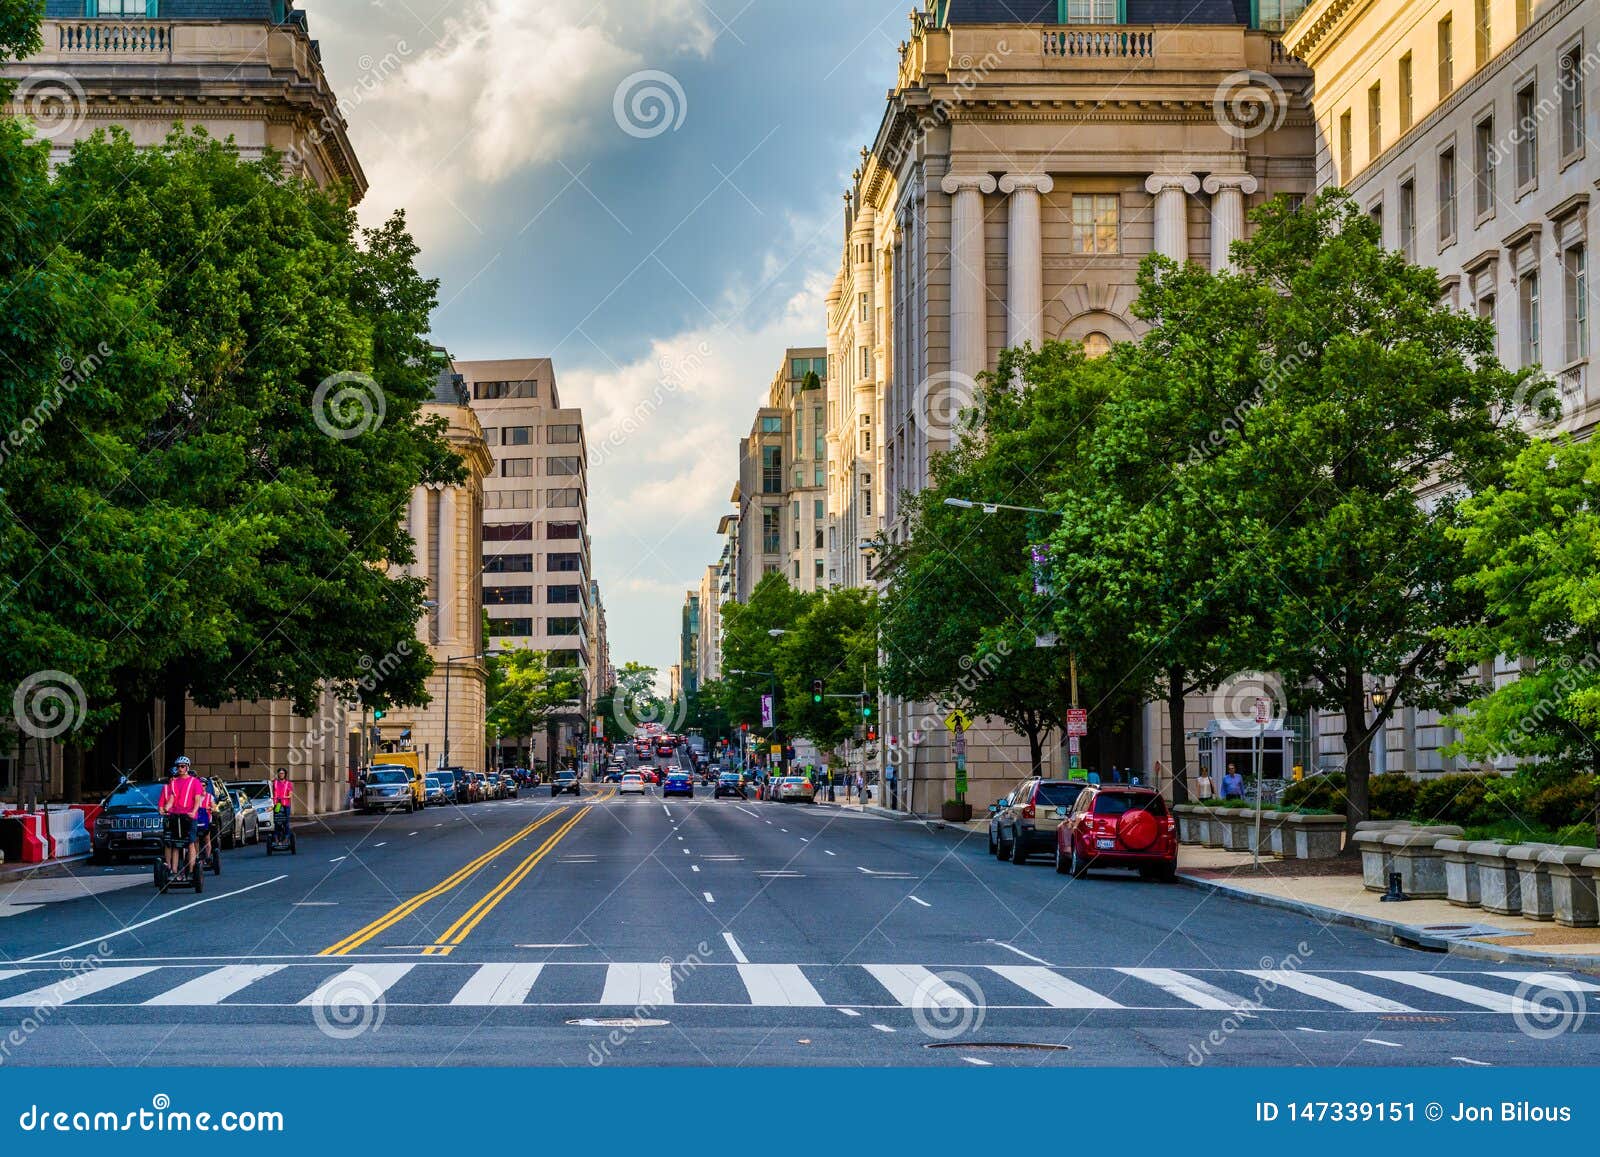 12th Street In Downtown Washington Dc Editorial Photo Image Of Tourism Clouds 147339151 